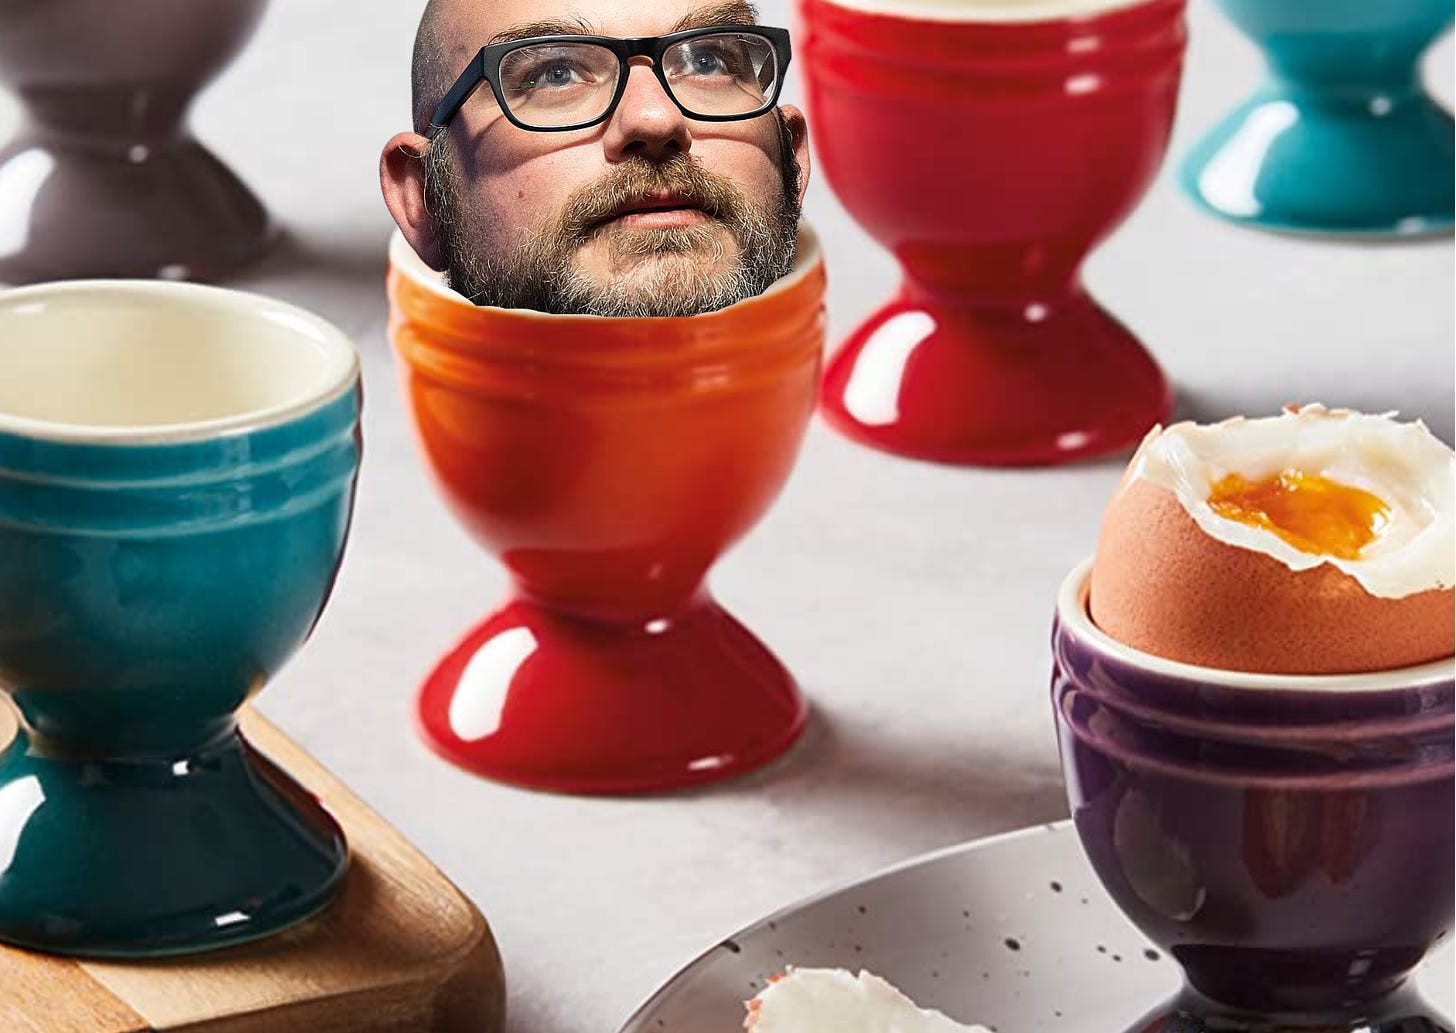 A load of egg cups. One of them contains Matthew Yglesias' head.